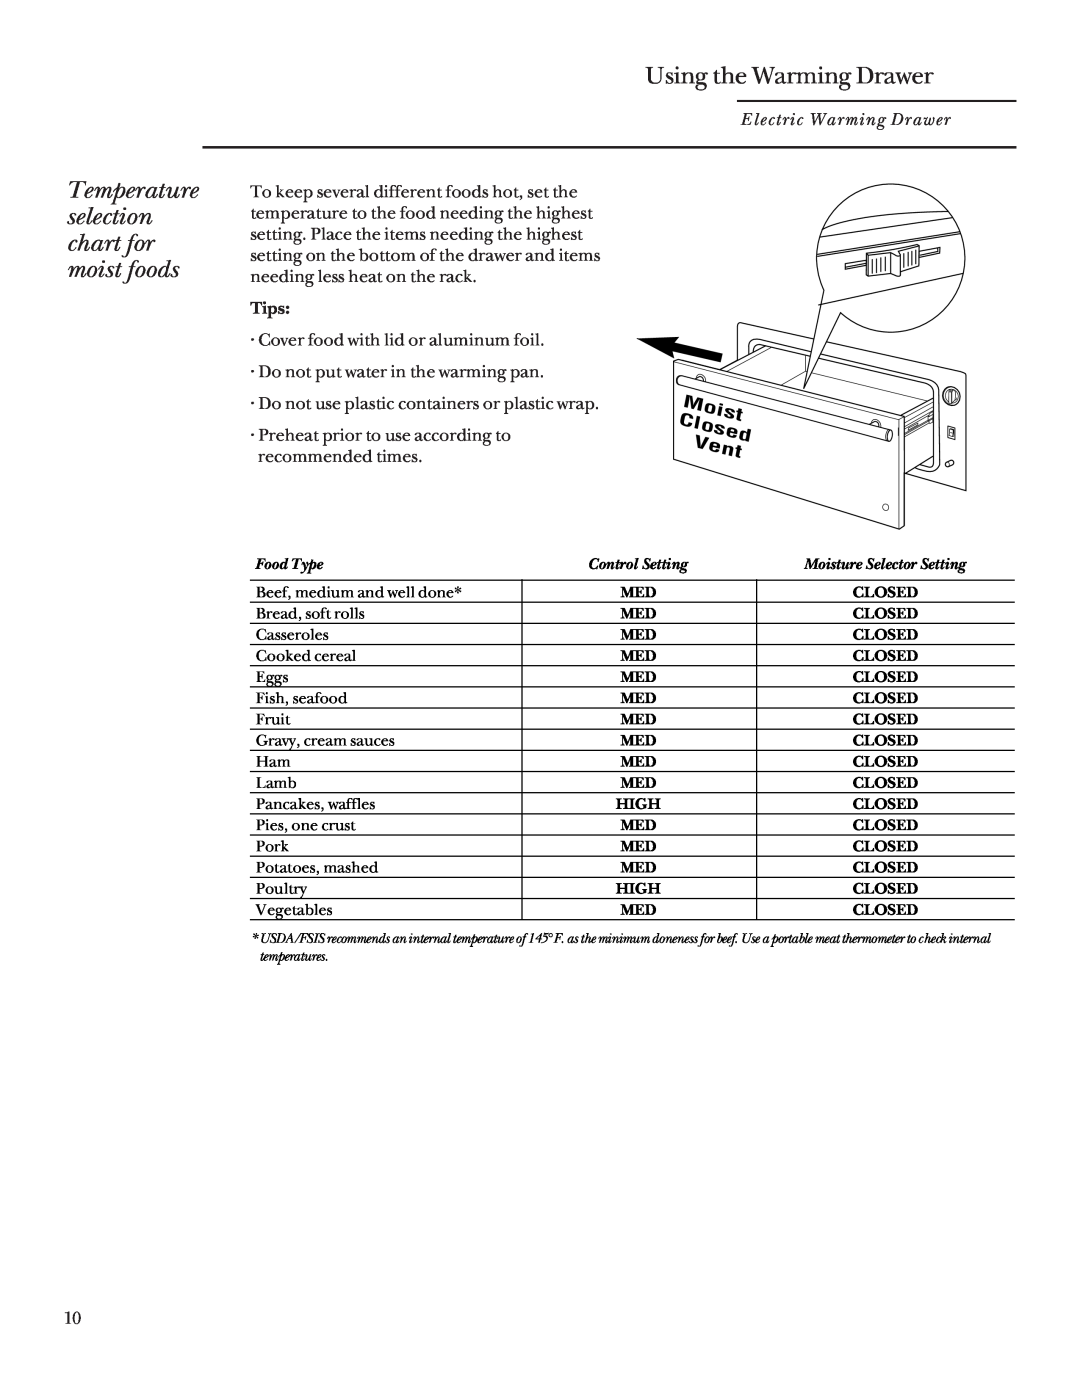 GE ZDK910, ZDT910 manual Temperature selection chart for moist foods, Using the Warming Drawer, Moist, Closed, Vent 